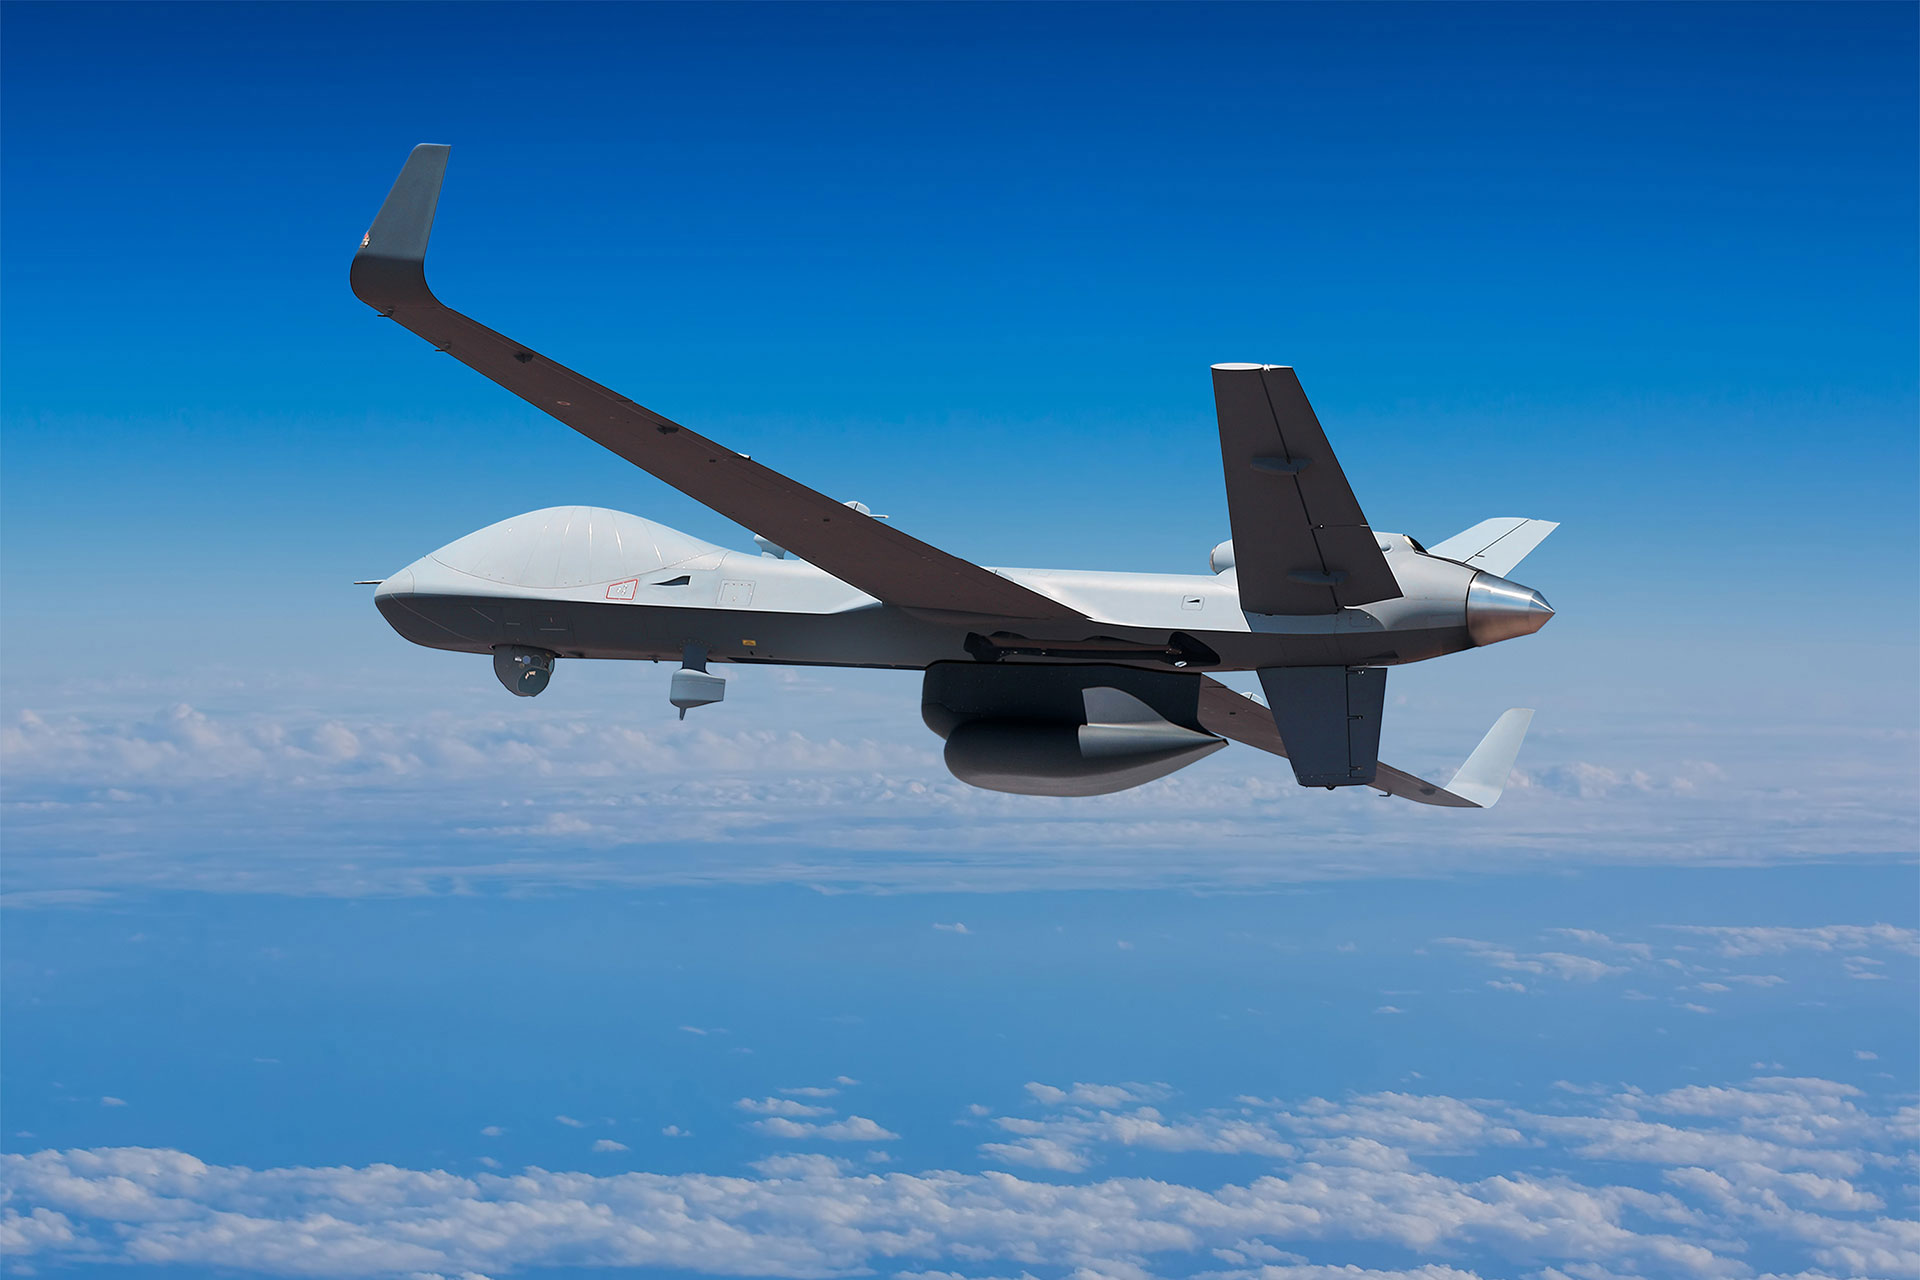 Image about General Atomics Receives $189 Million Belgian Order for MQ-9B SkyGuardian Drones